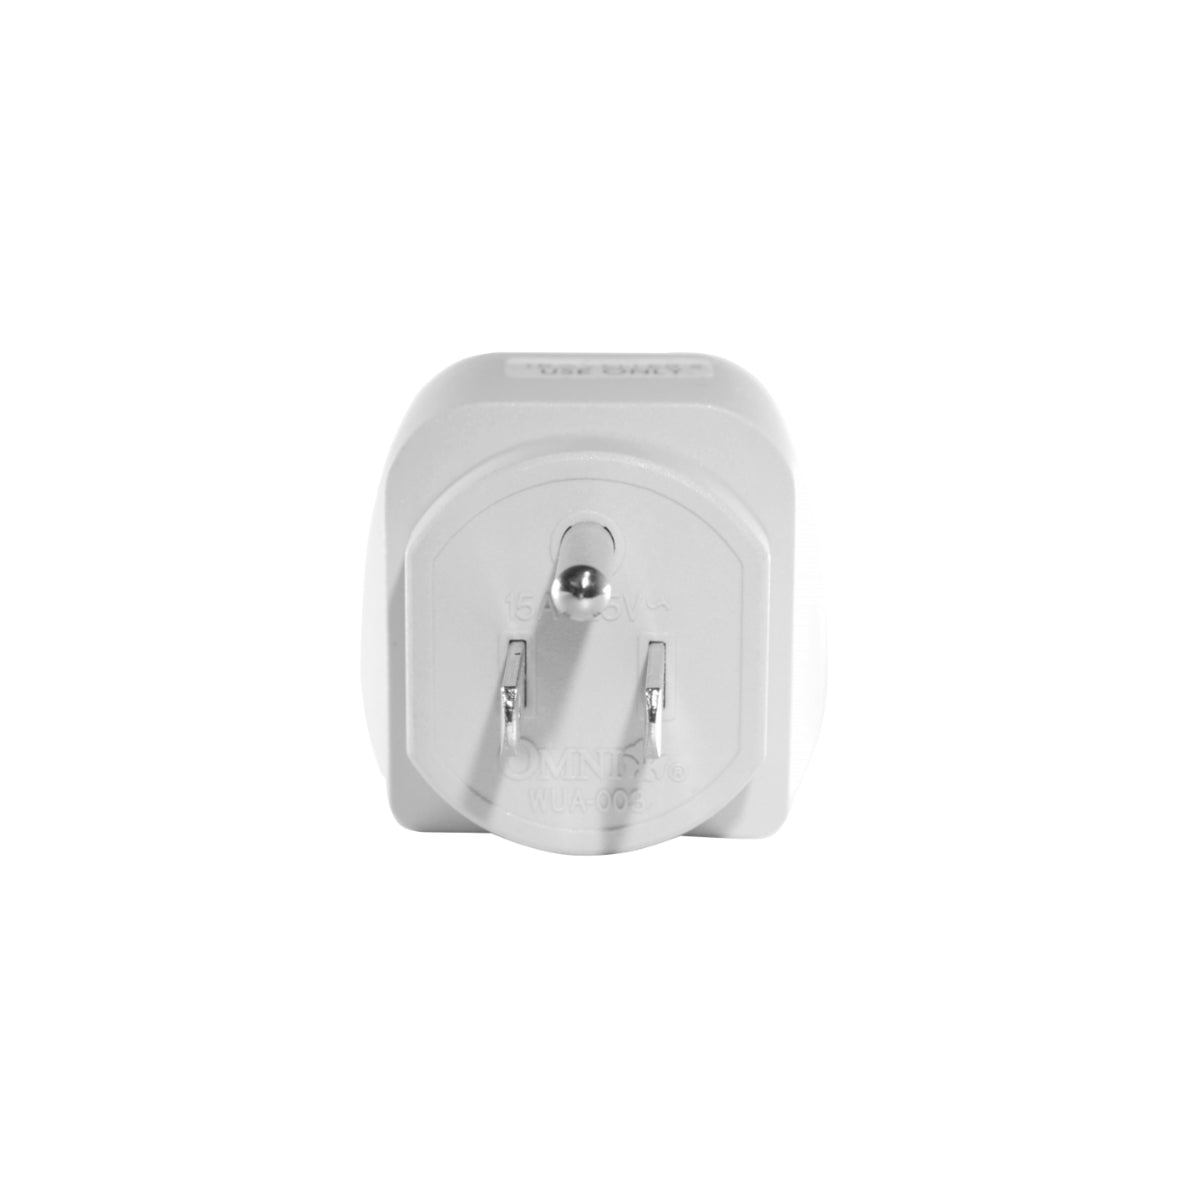 OMNI Universal Adapter with Ground 15A 220V Plug and Outlet for Electronics & Appliances | WUA-003